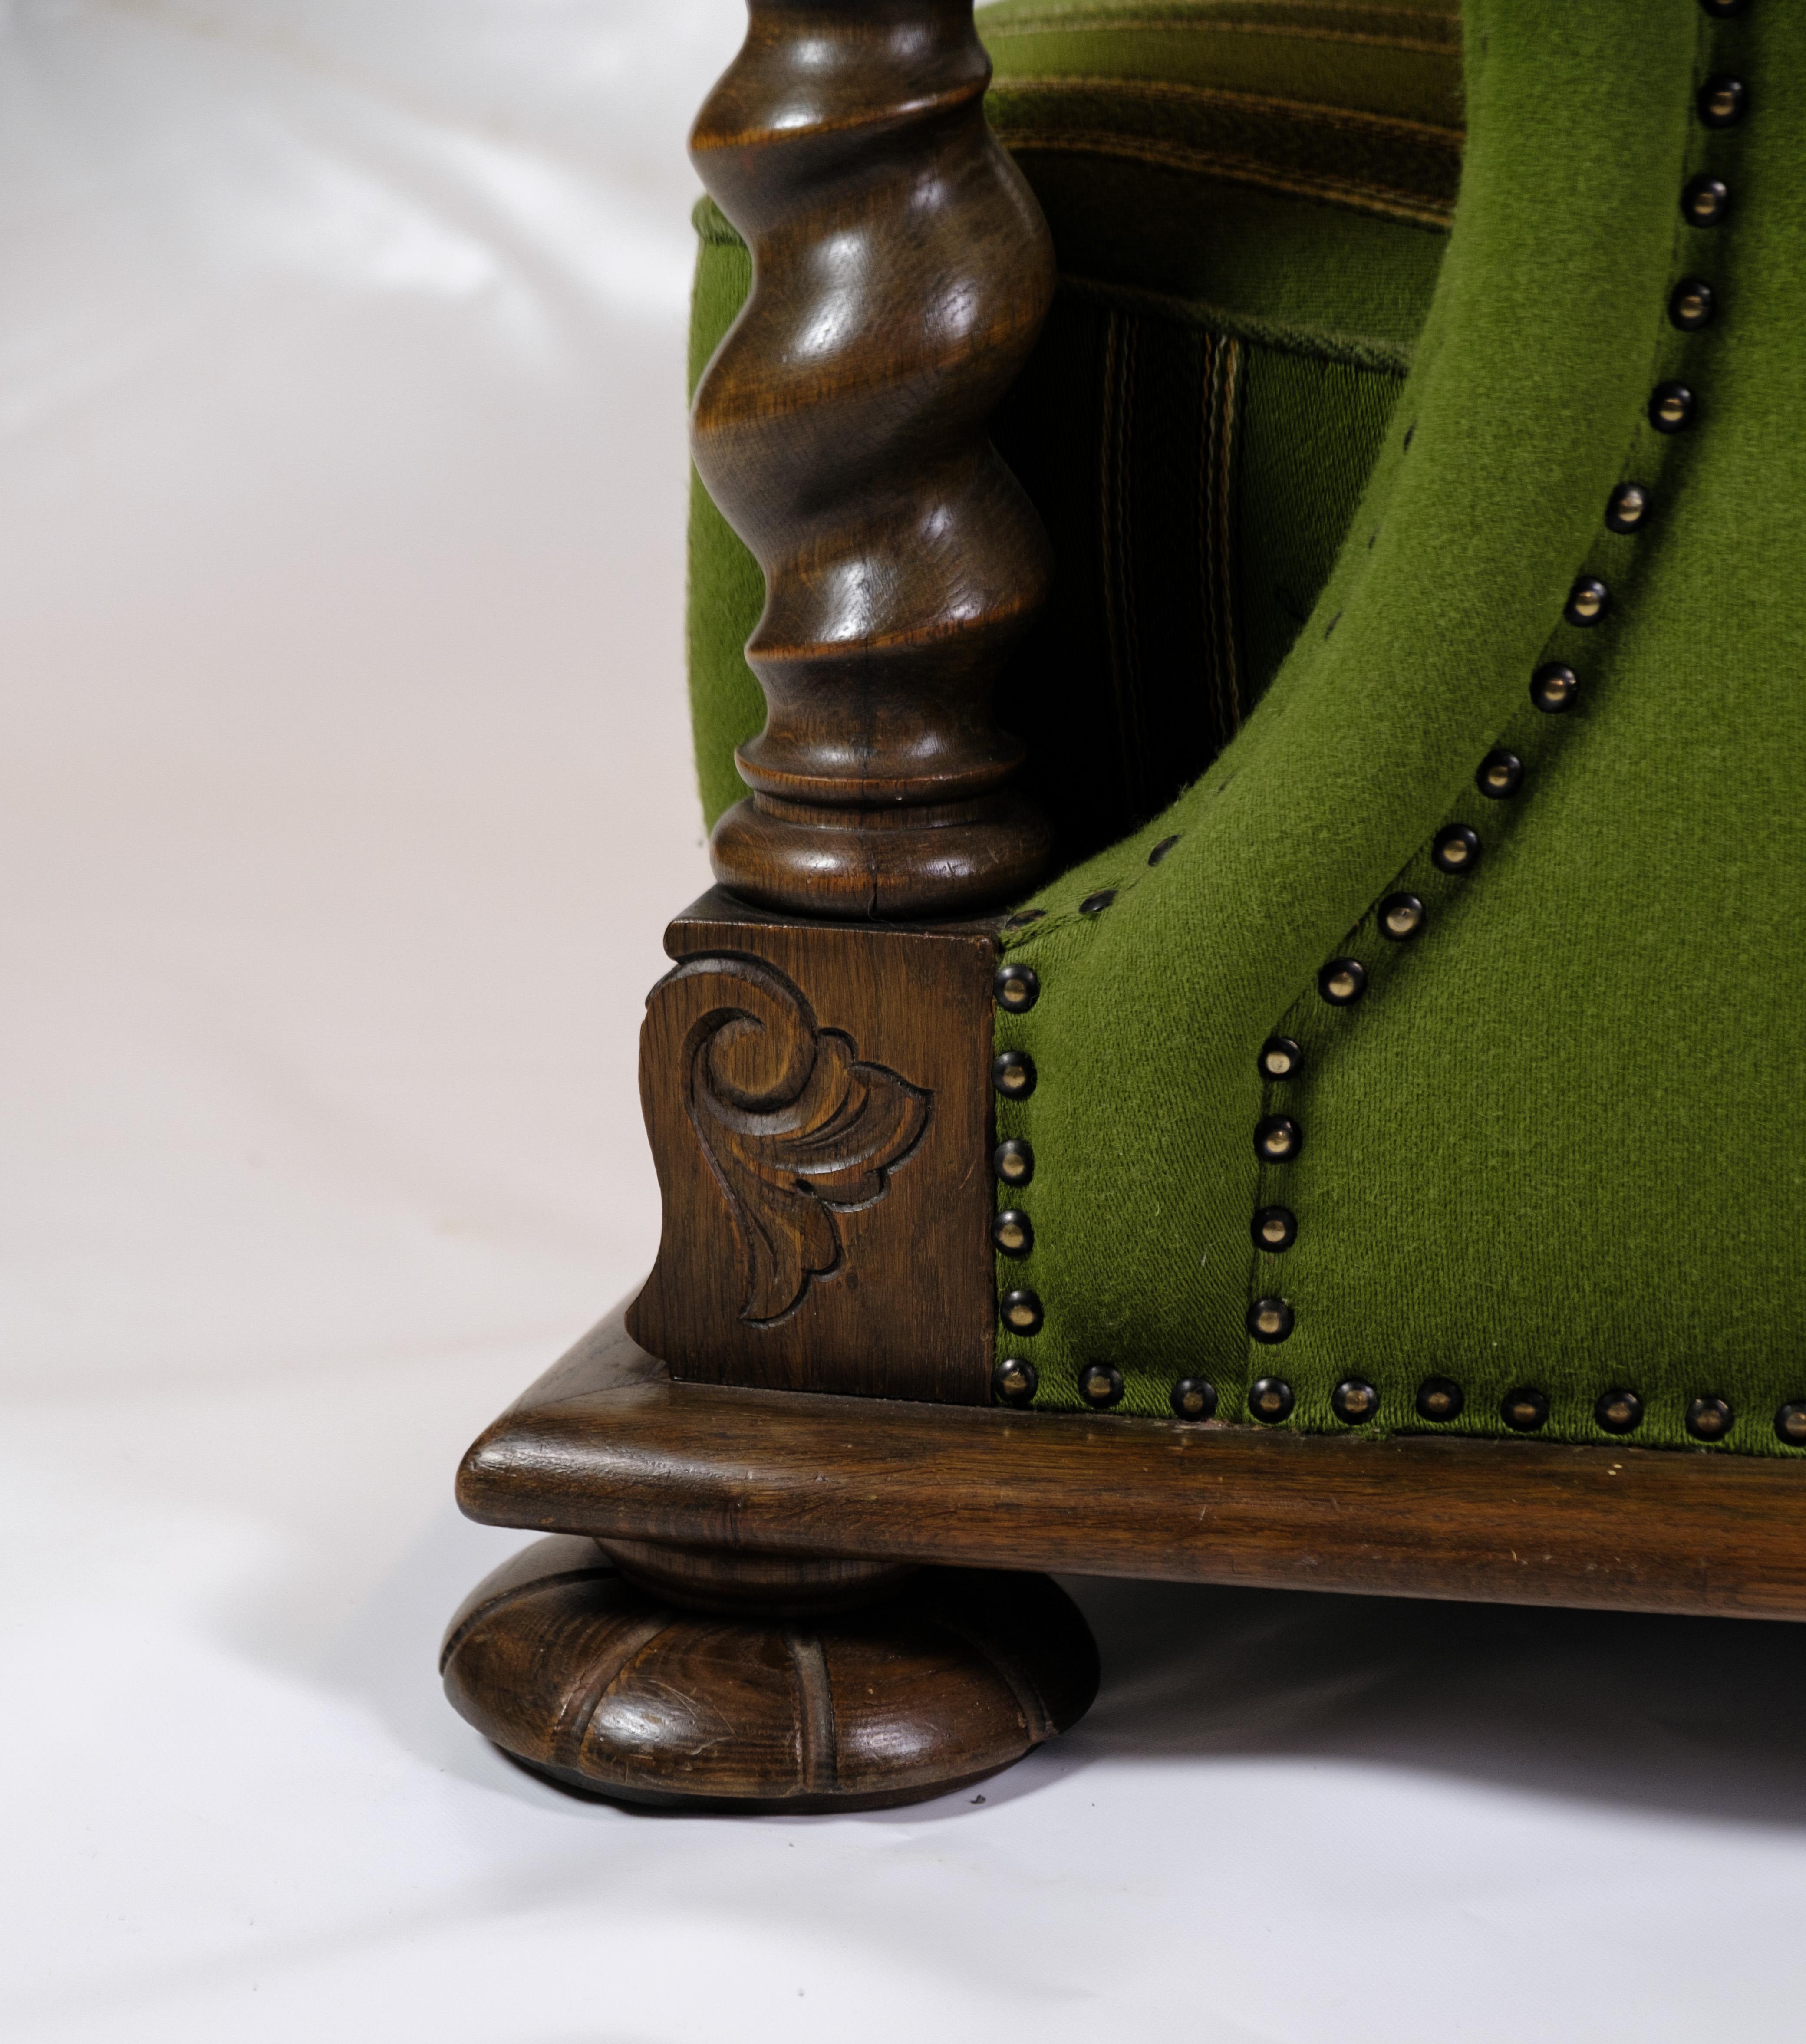 Renaissance High-backed Armchair in Green fabric with Wood Carvings from 1920s. For Sale